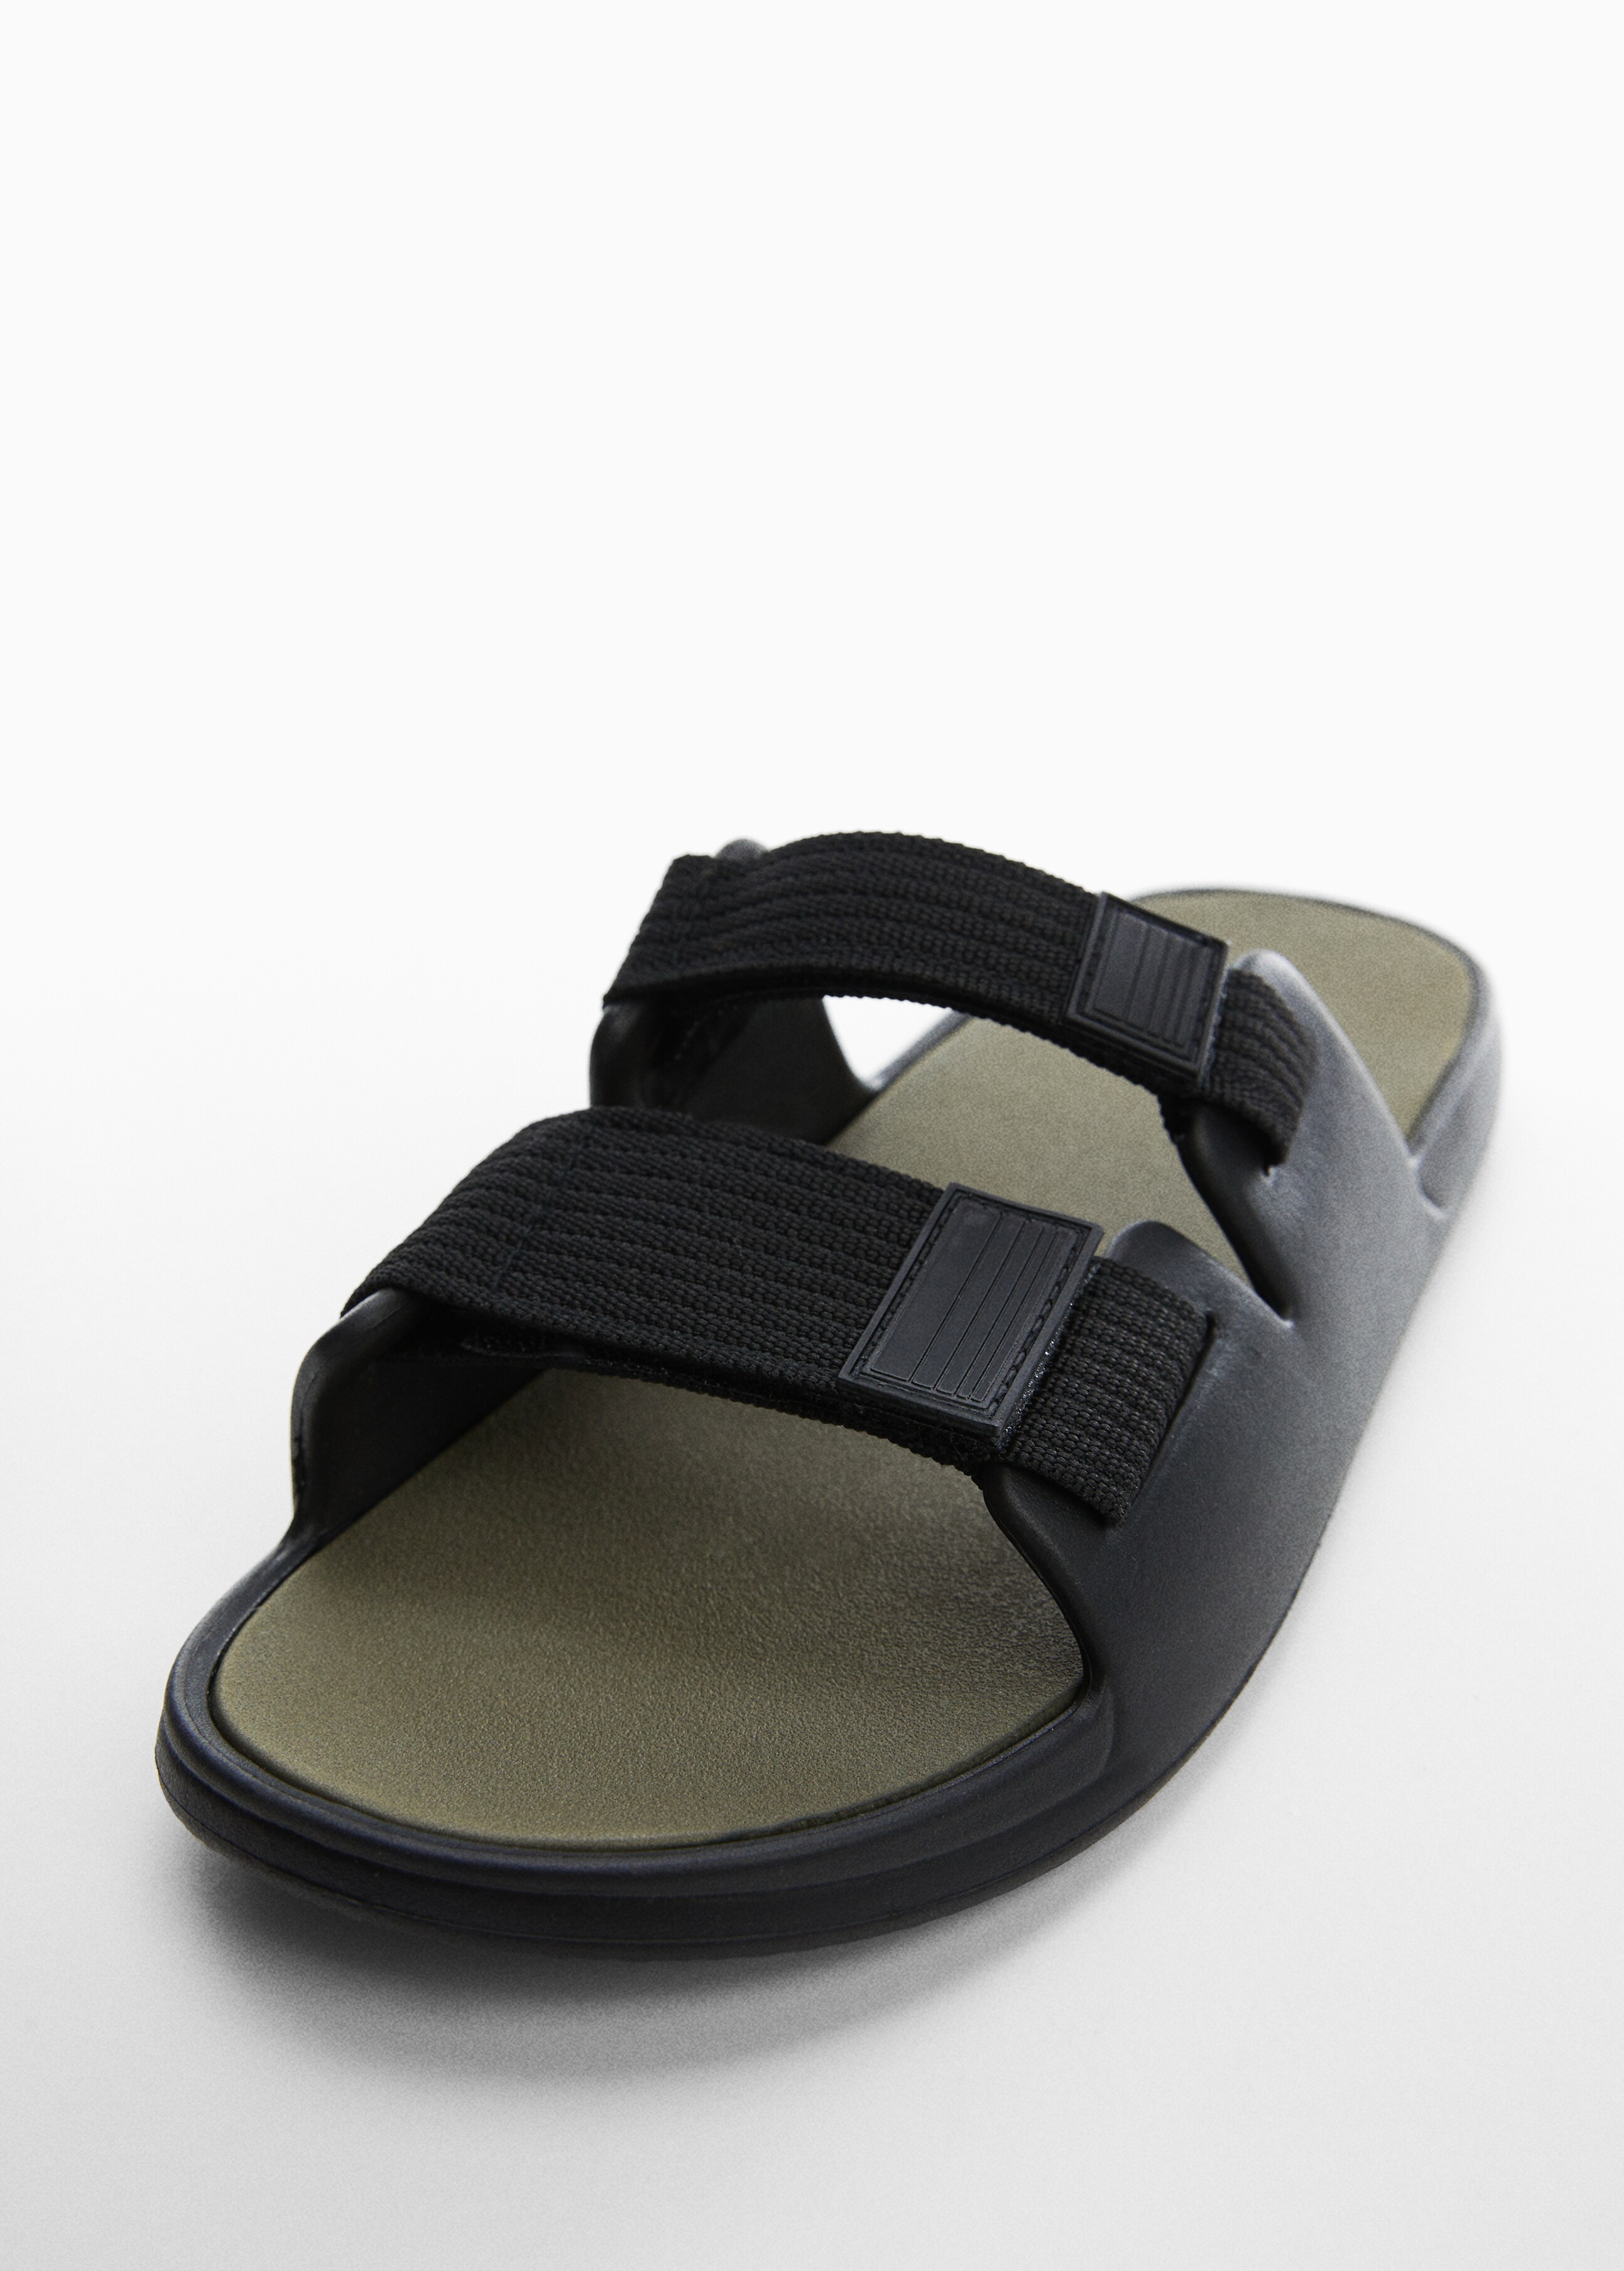 Velcro strap sandal - Details of the article 2